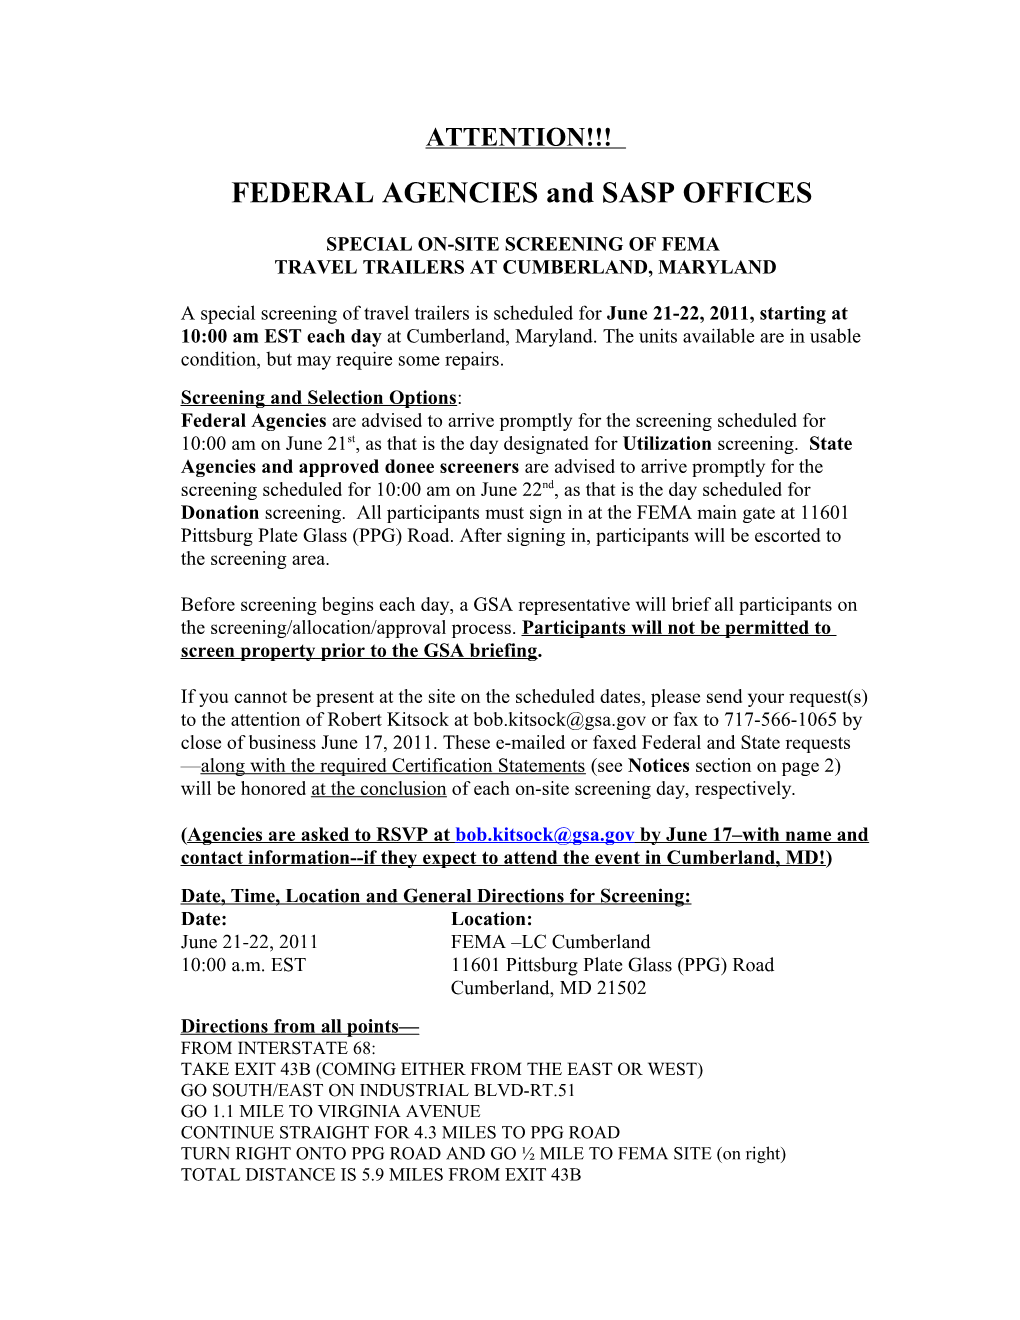 FEDERAL AGENCIES and SASP OFFICES